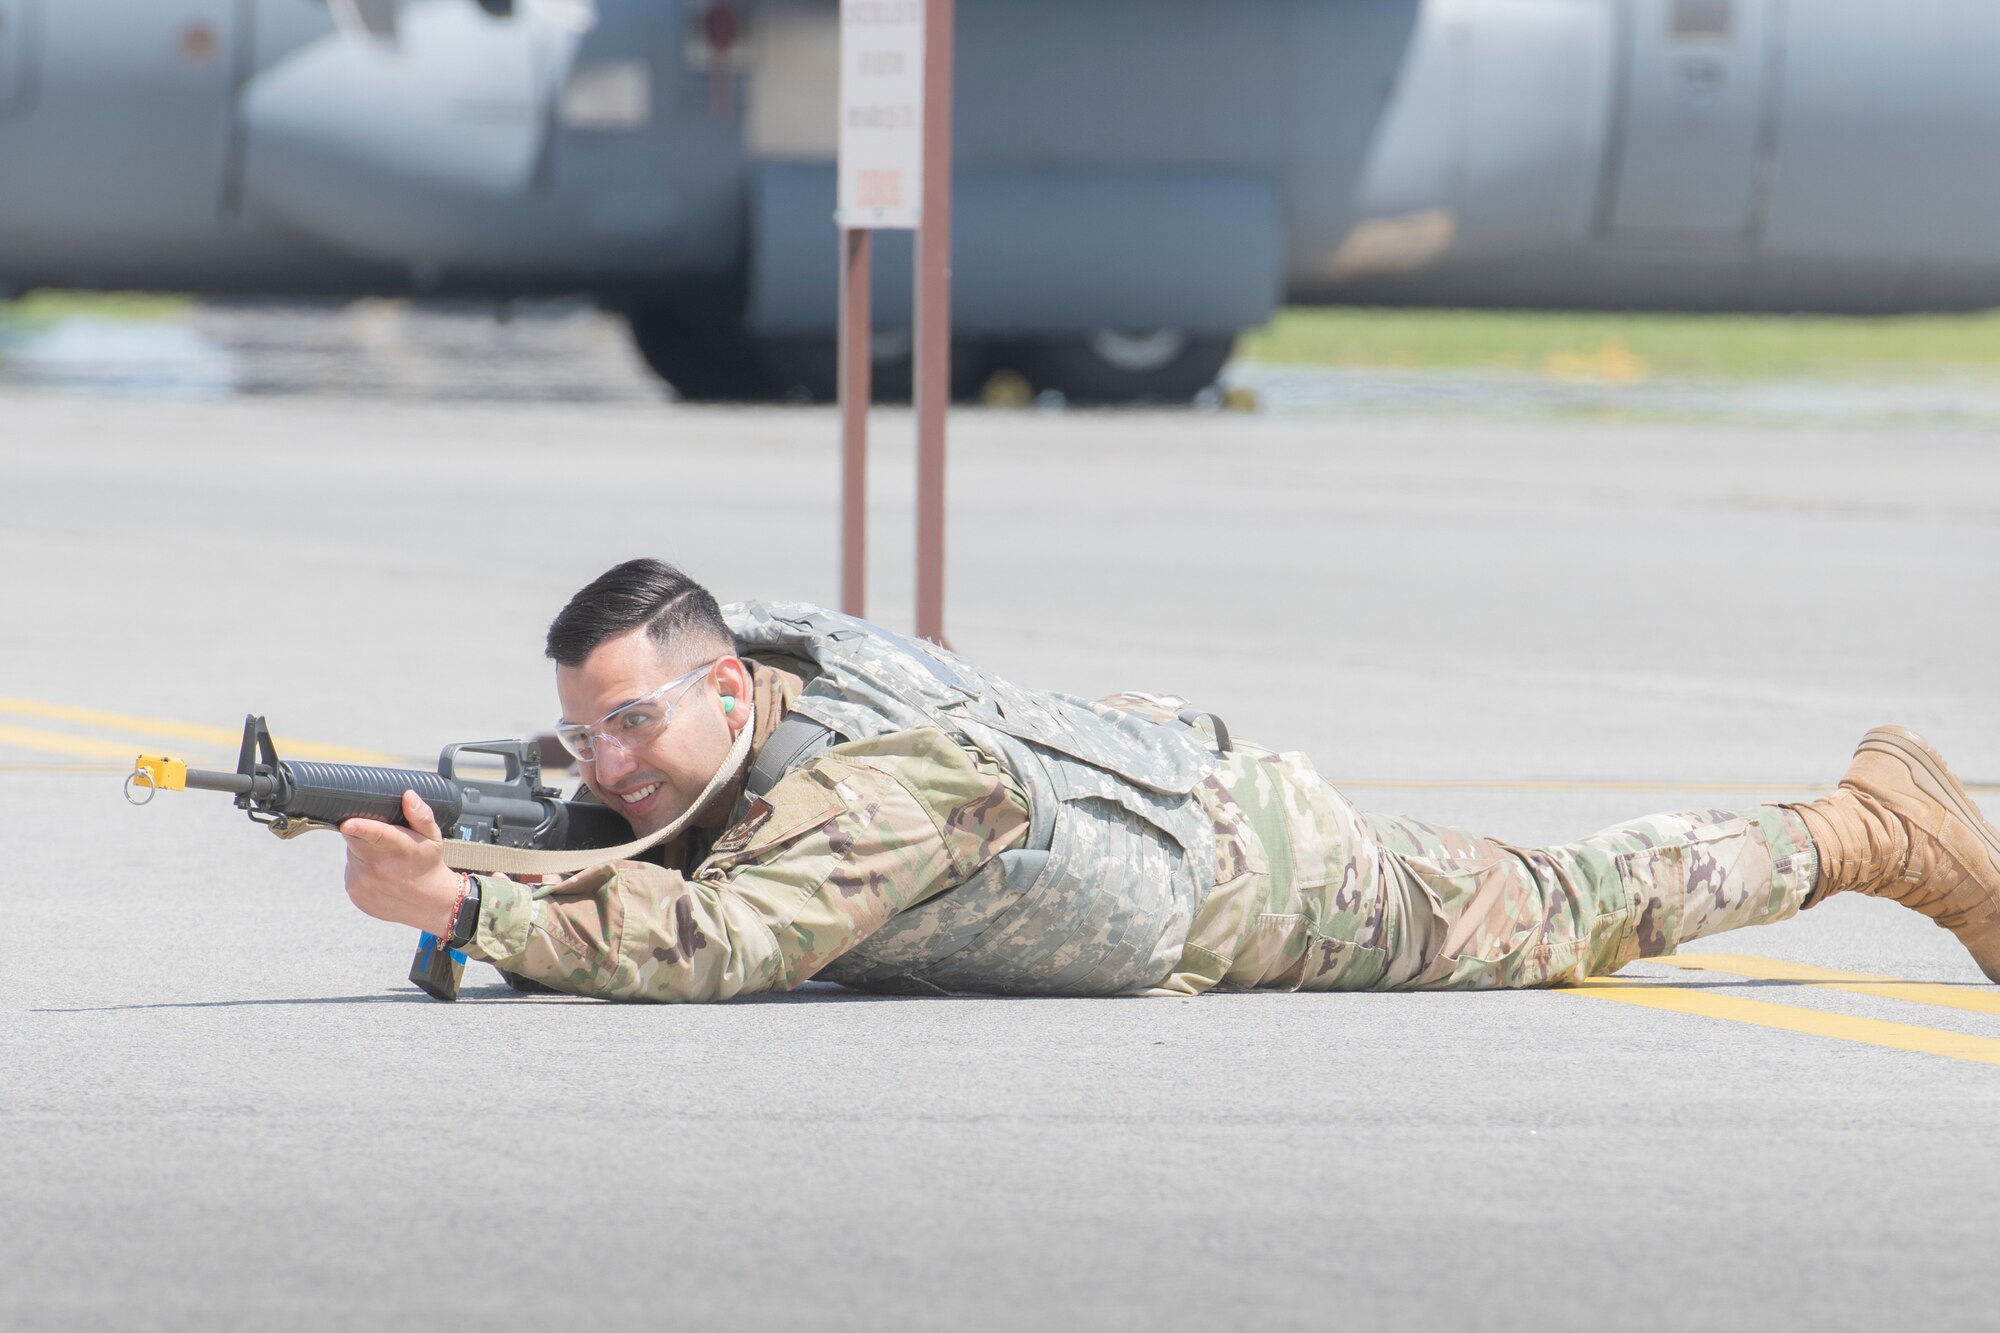 Senior Airman Raymundo Valero Delgado, 374th Comptroller Squadron financial operations technician, aims a weapon during the fly-away security training at Yokota Air Base, Japan, May 10, 2022.The 374th Security Forces Squadron conducted fly-away security training as part of a training during the exercise week. This training assessed Yokota's ability to perform Agile Combat Employment across a range of military operations in a complex and dynamic international security environment. (U.S. Air Force photo by Machiko Arita)